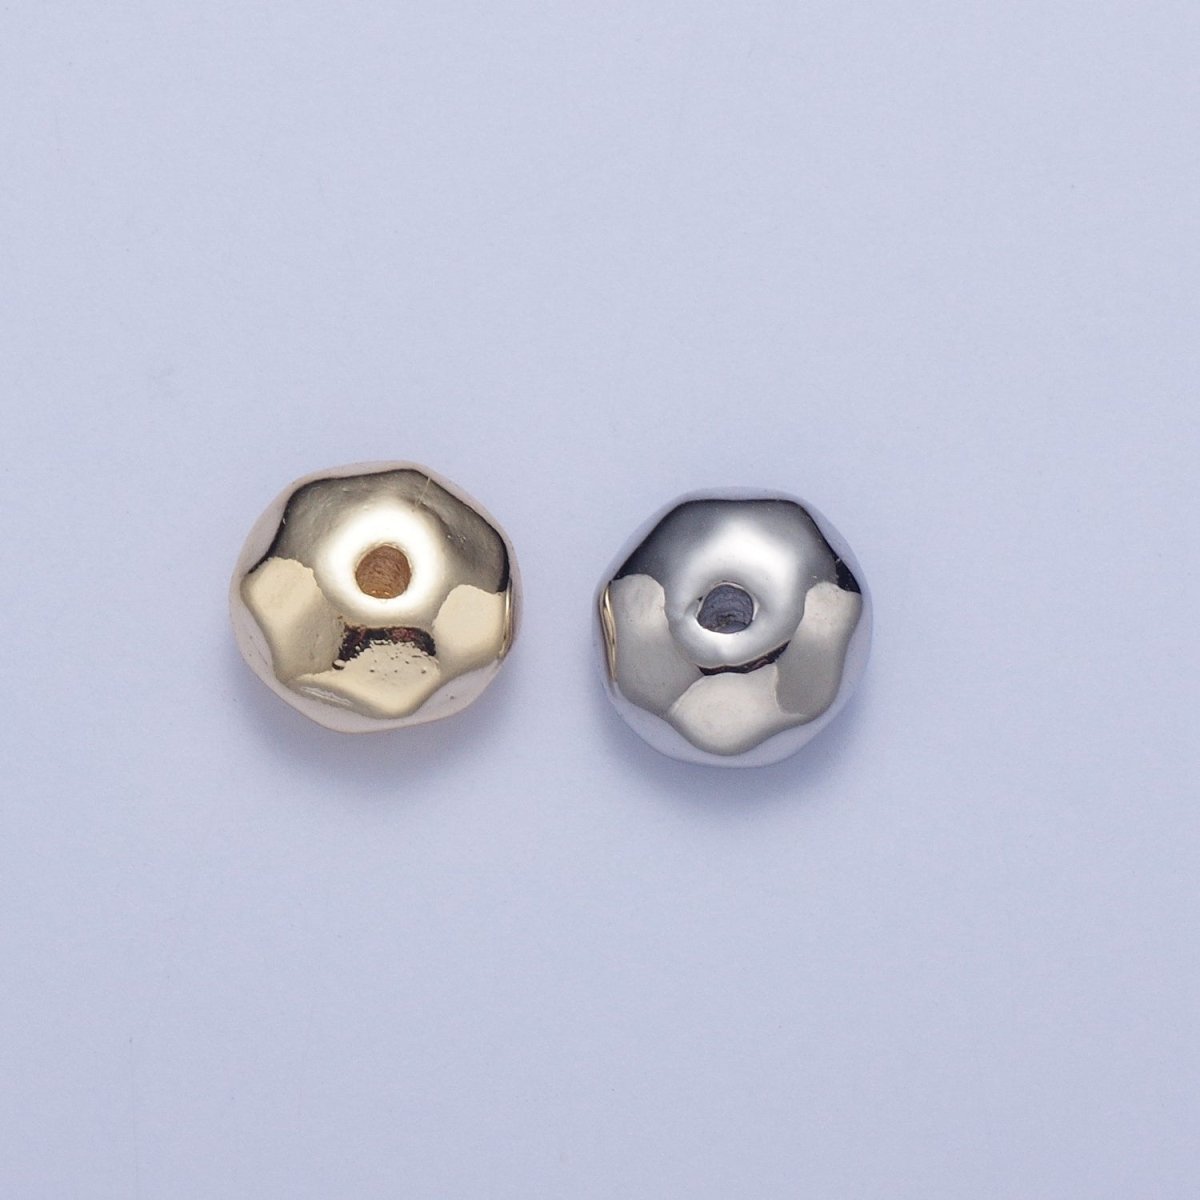 20 Pieces Pack 6mm Round Abstract Geometric Spacer Beads Jewelry Making in Gold & Silver | W-932 W-933 - DLUXCA